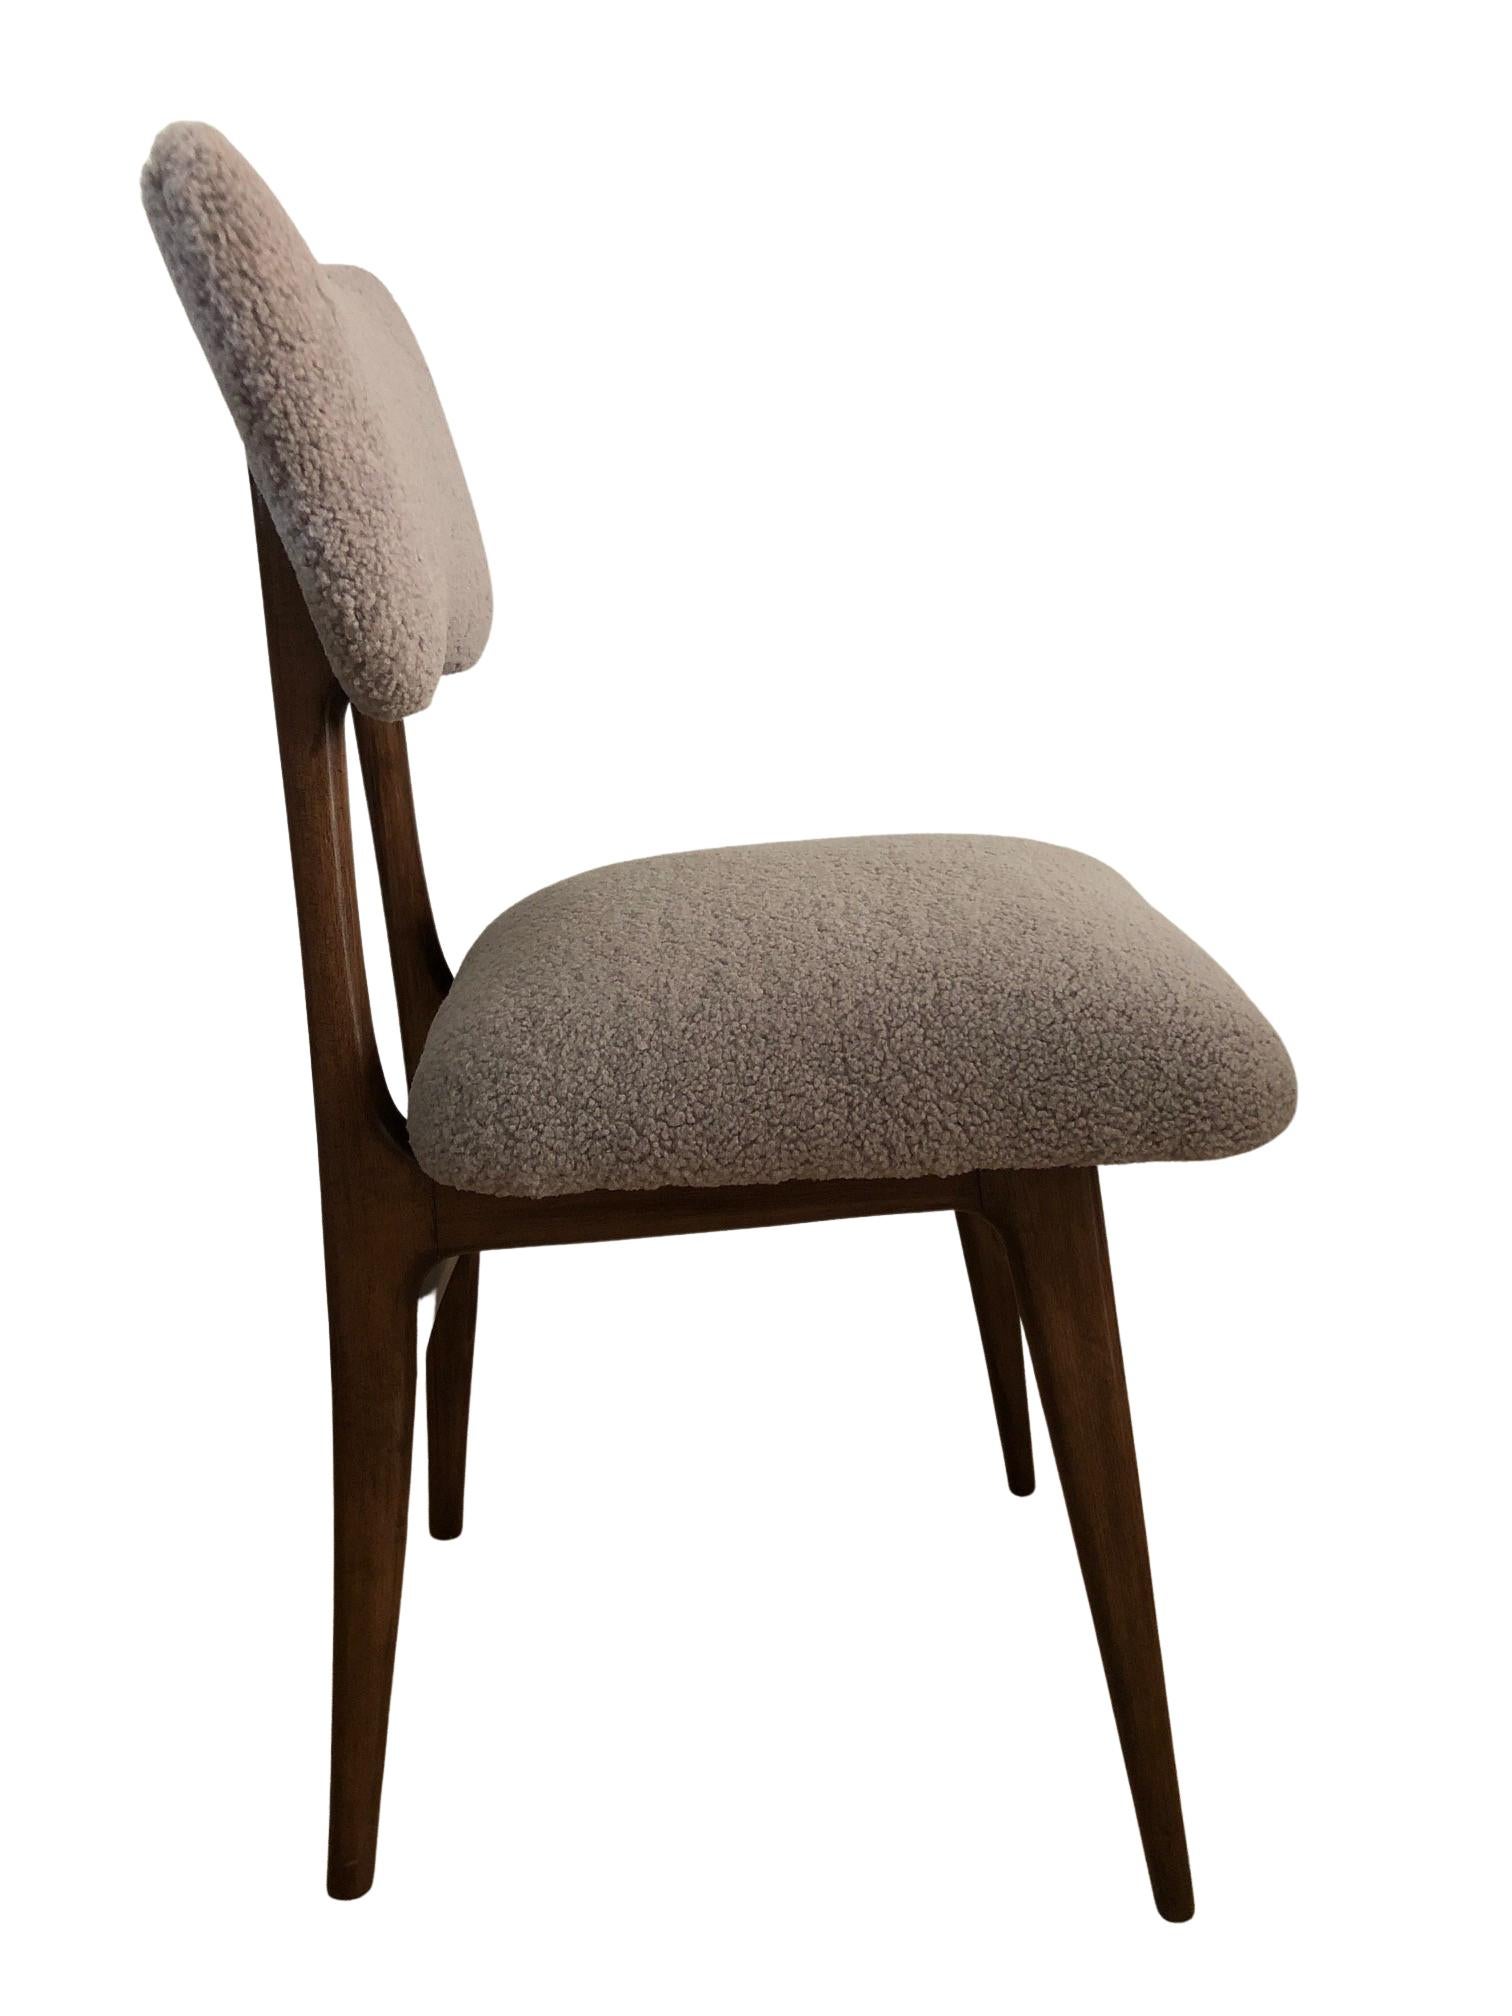 Hand-Crafted Set of 4 Midcentury Beige Bouclé Dining Chairs, Europe, 1960s For Sale